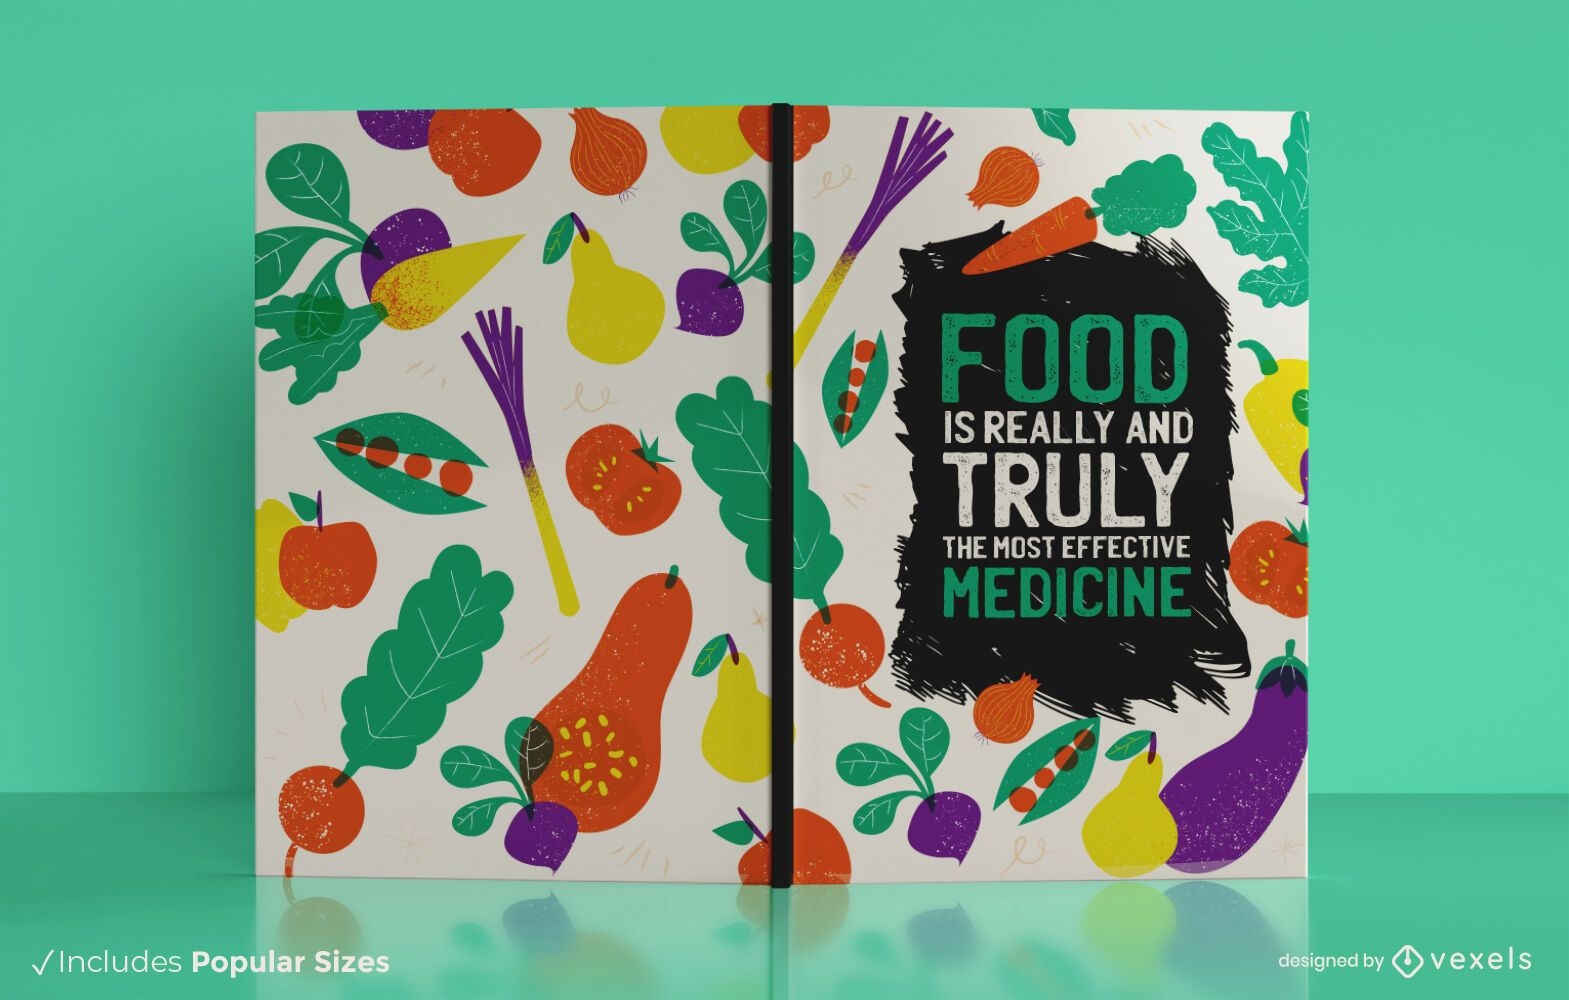 Food diary book cover design